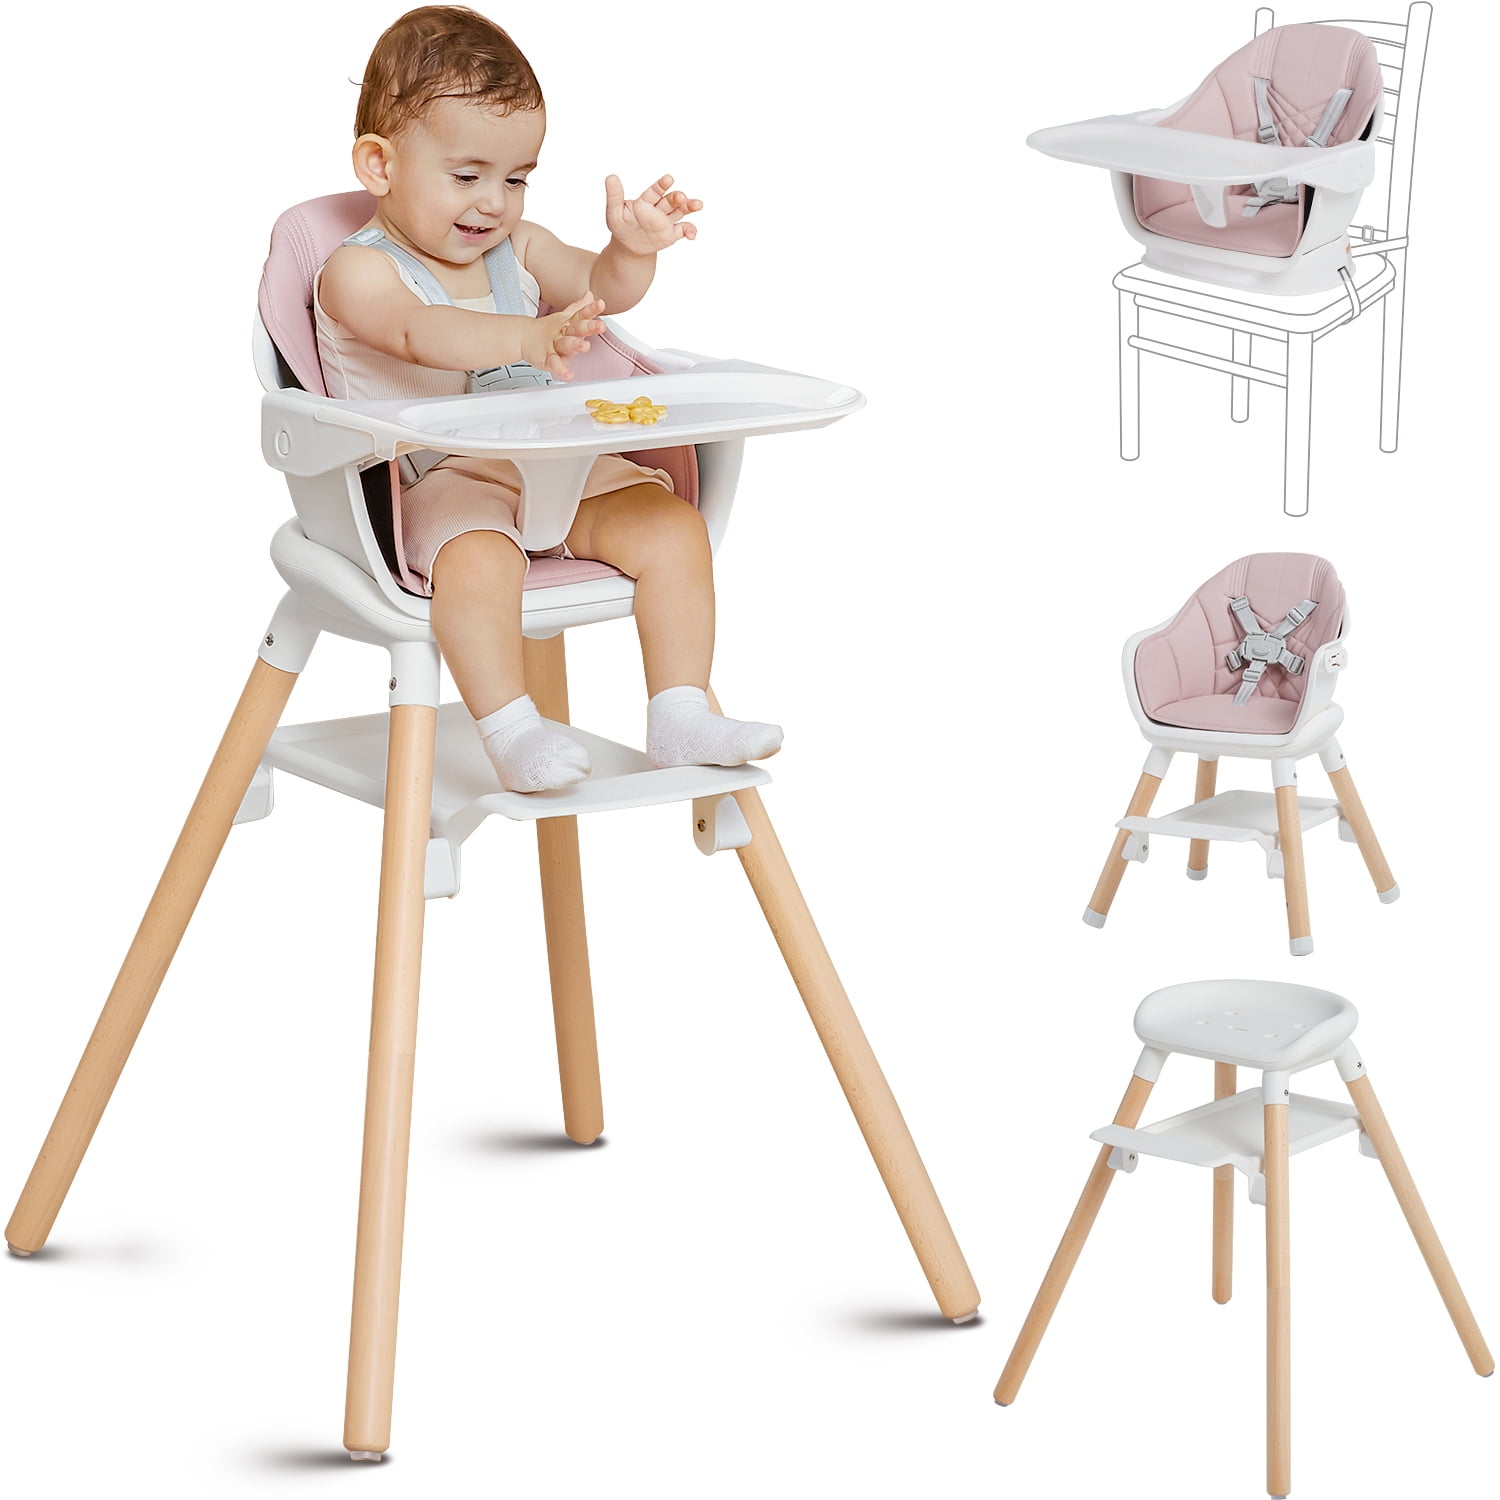 High Heels High Chairs — Her List Of Top Baby Products in 2019